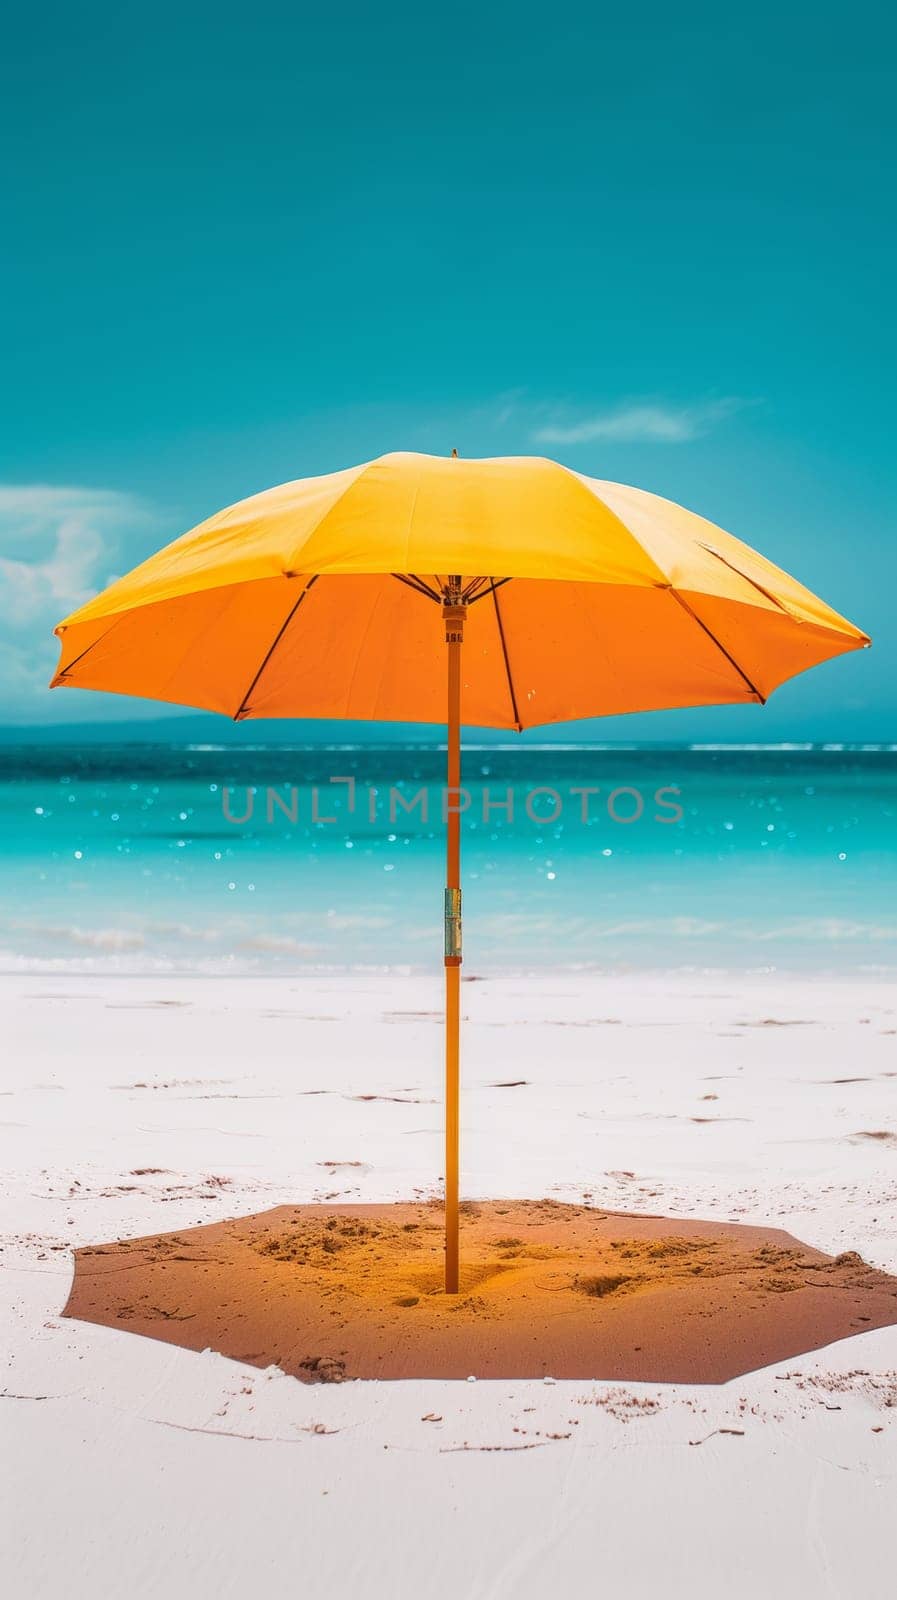 A yellow umbrella on the beach with a blue sky and ocean